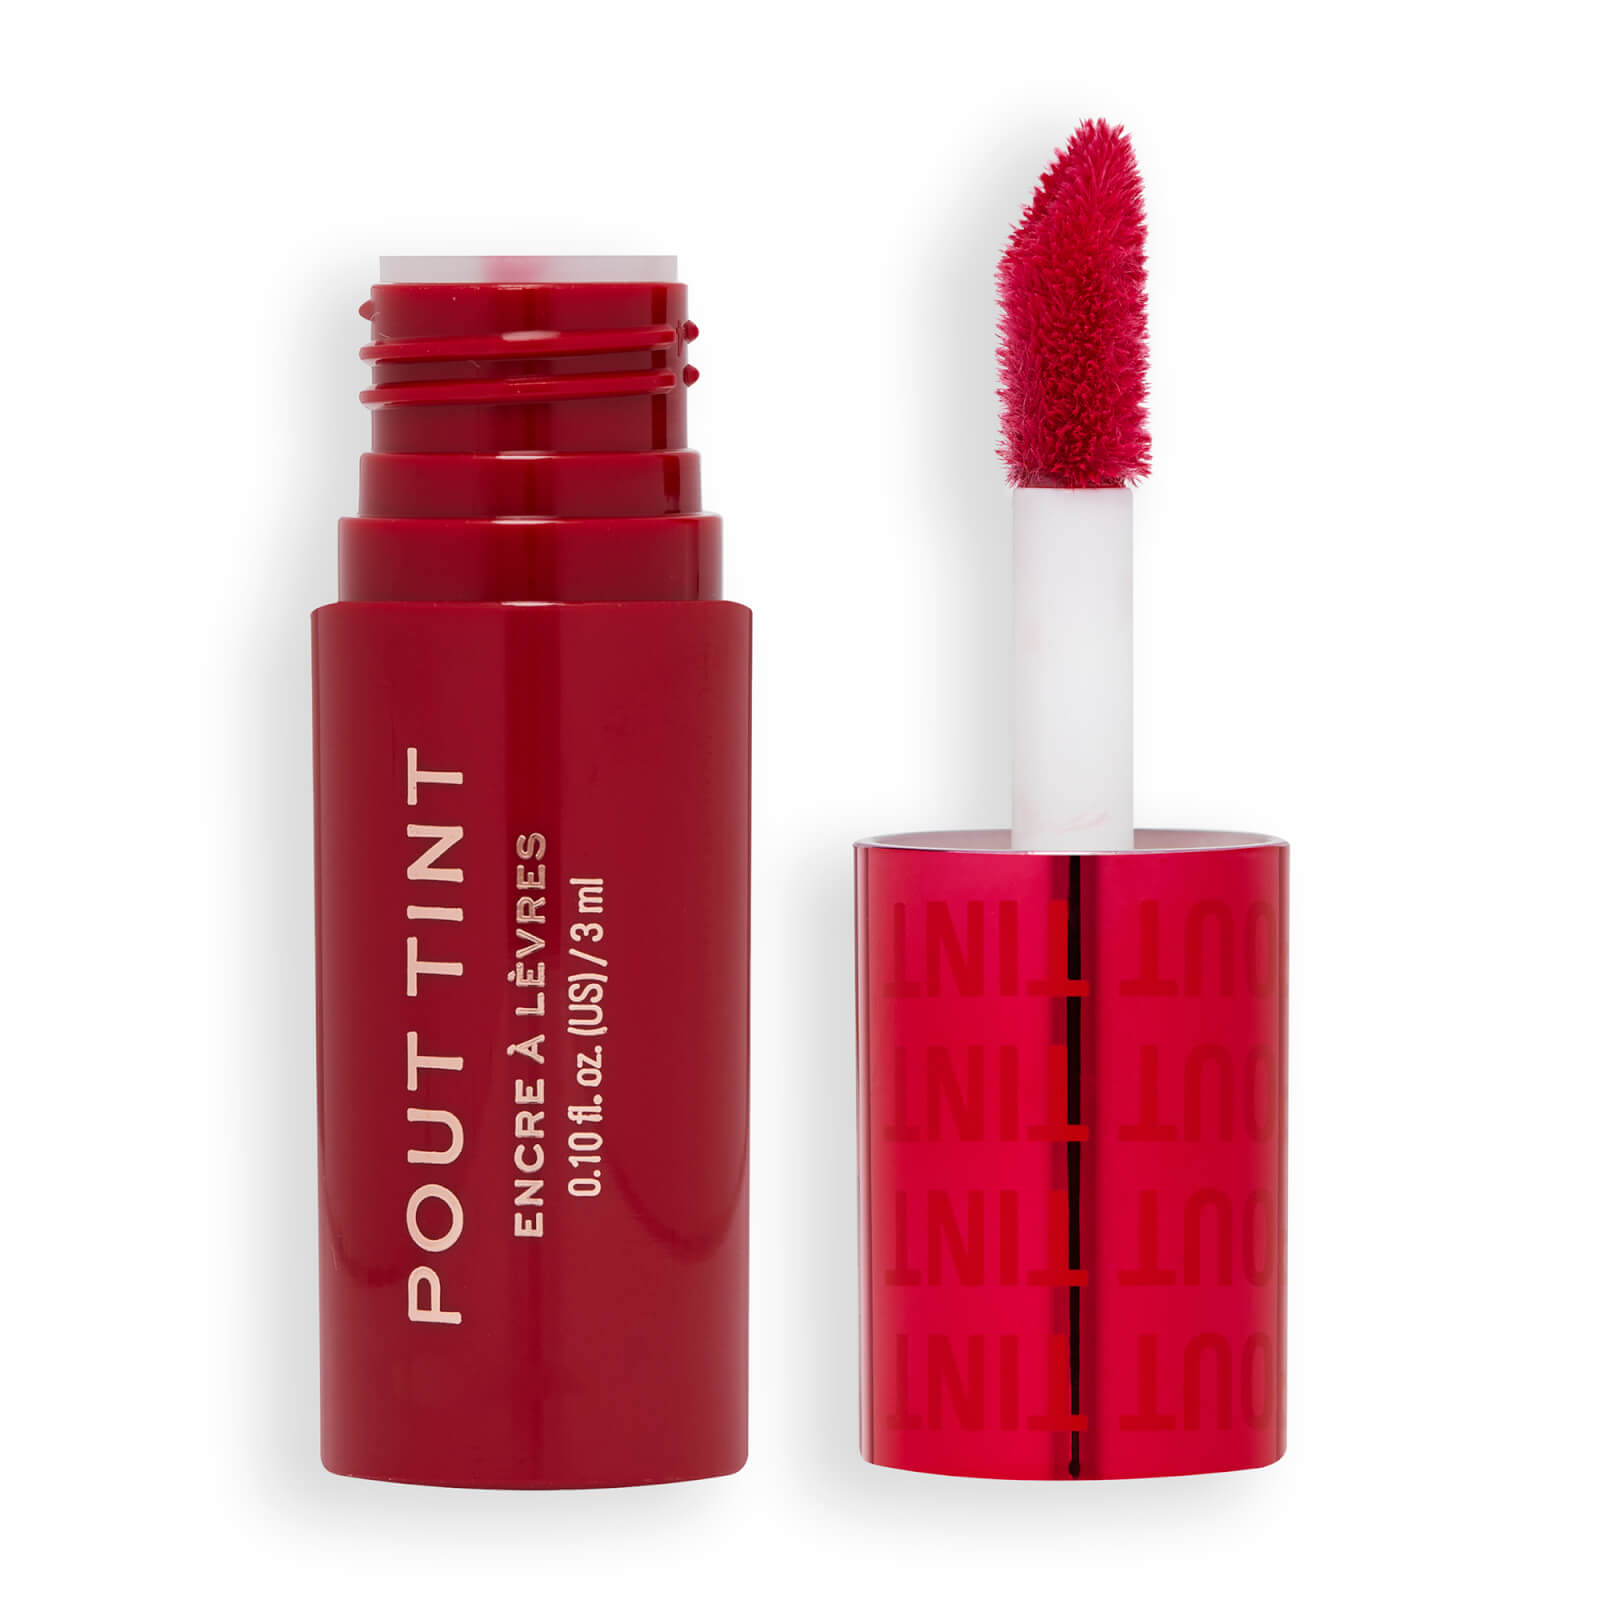 Makeup Revolution Pout Tint 3ml (Various Shades) - Sizzlin Red